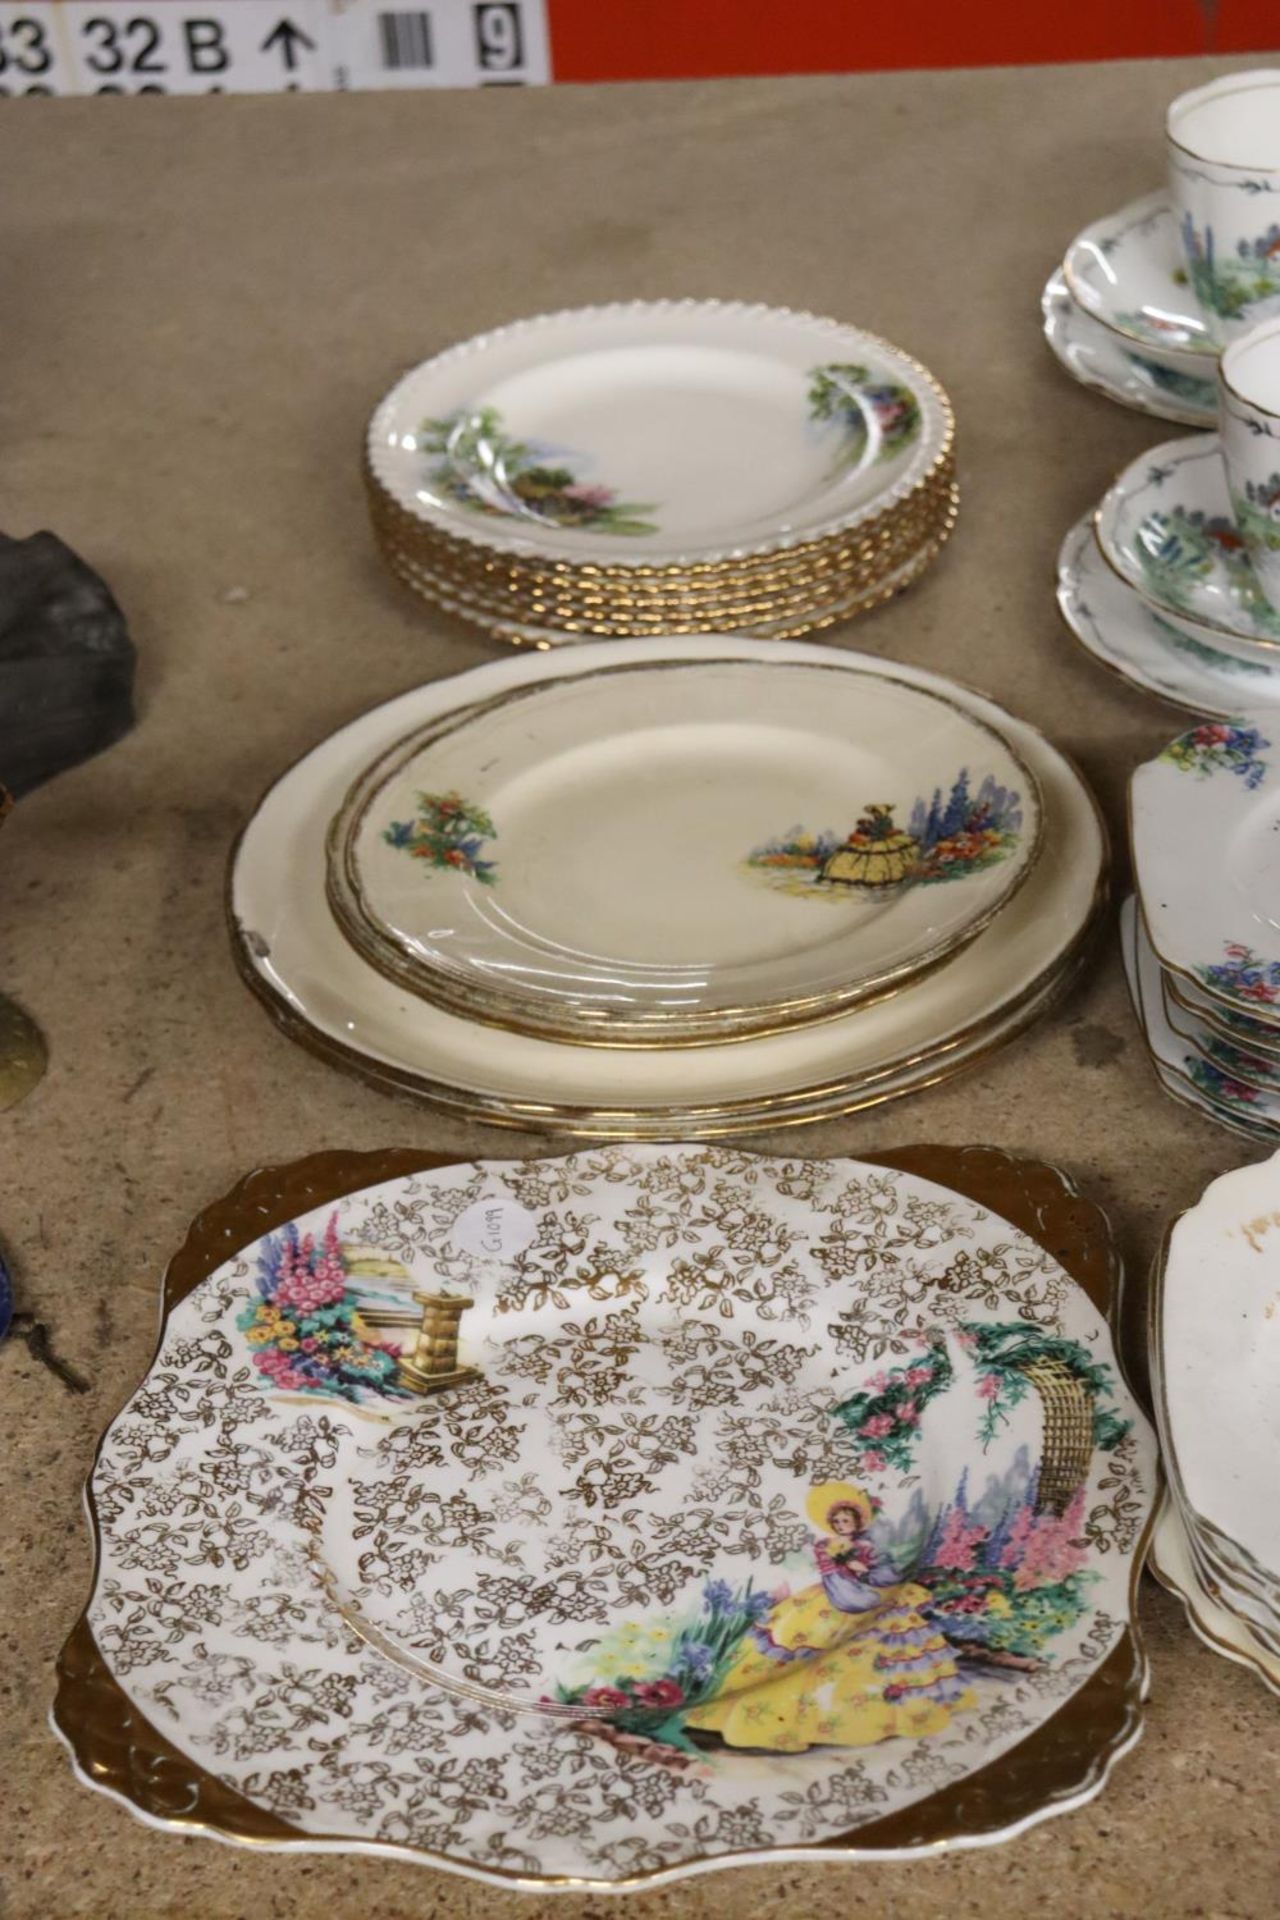 A QUANTITY OF VINTAGE CHINA CUPS, SAUCERS AND PLATES - Image 3 of 4